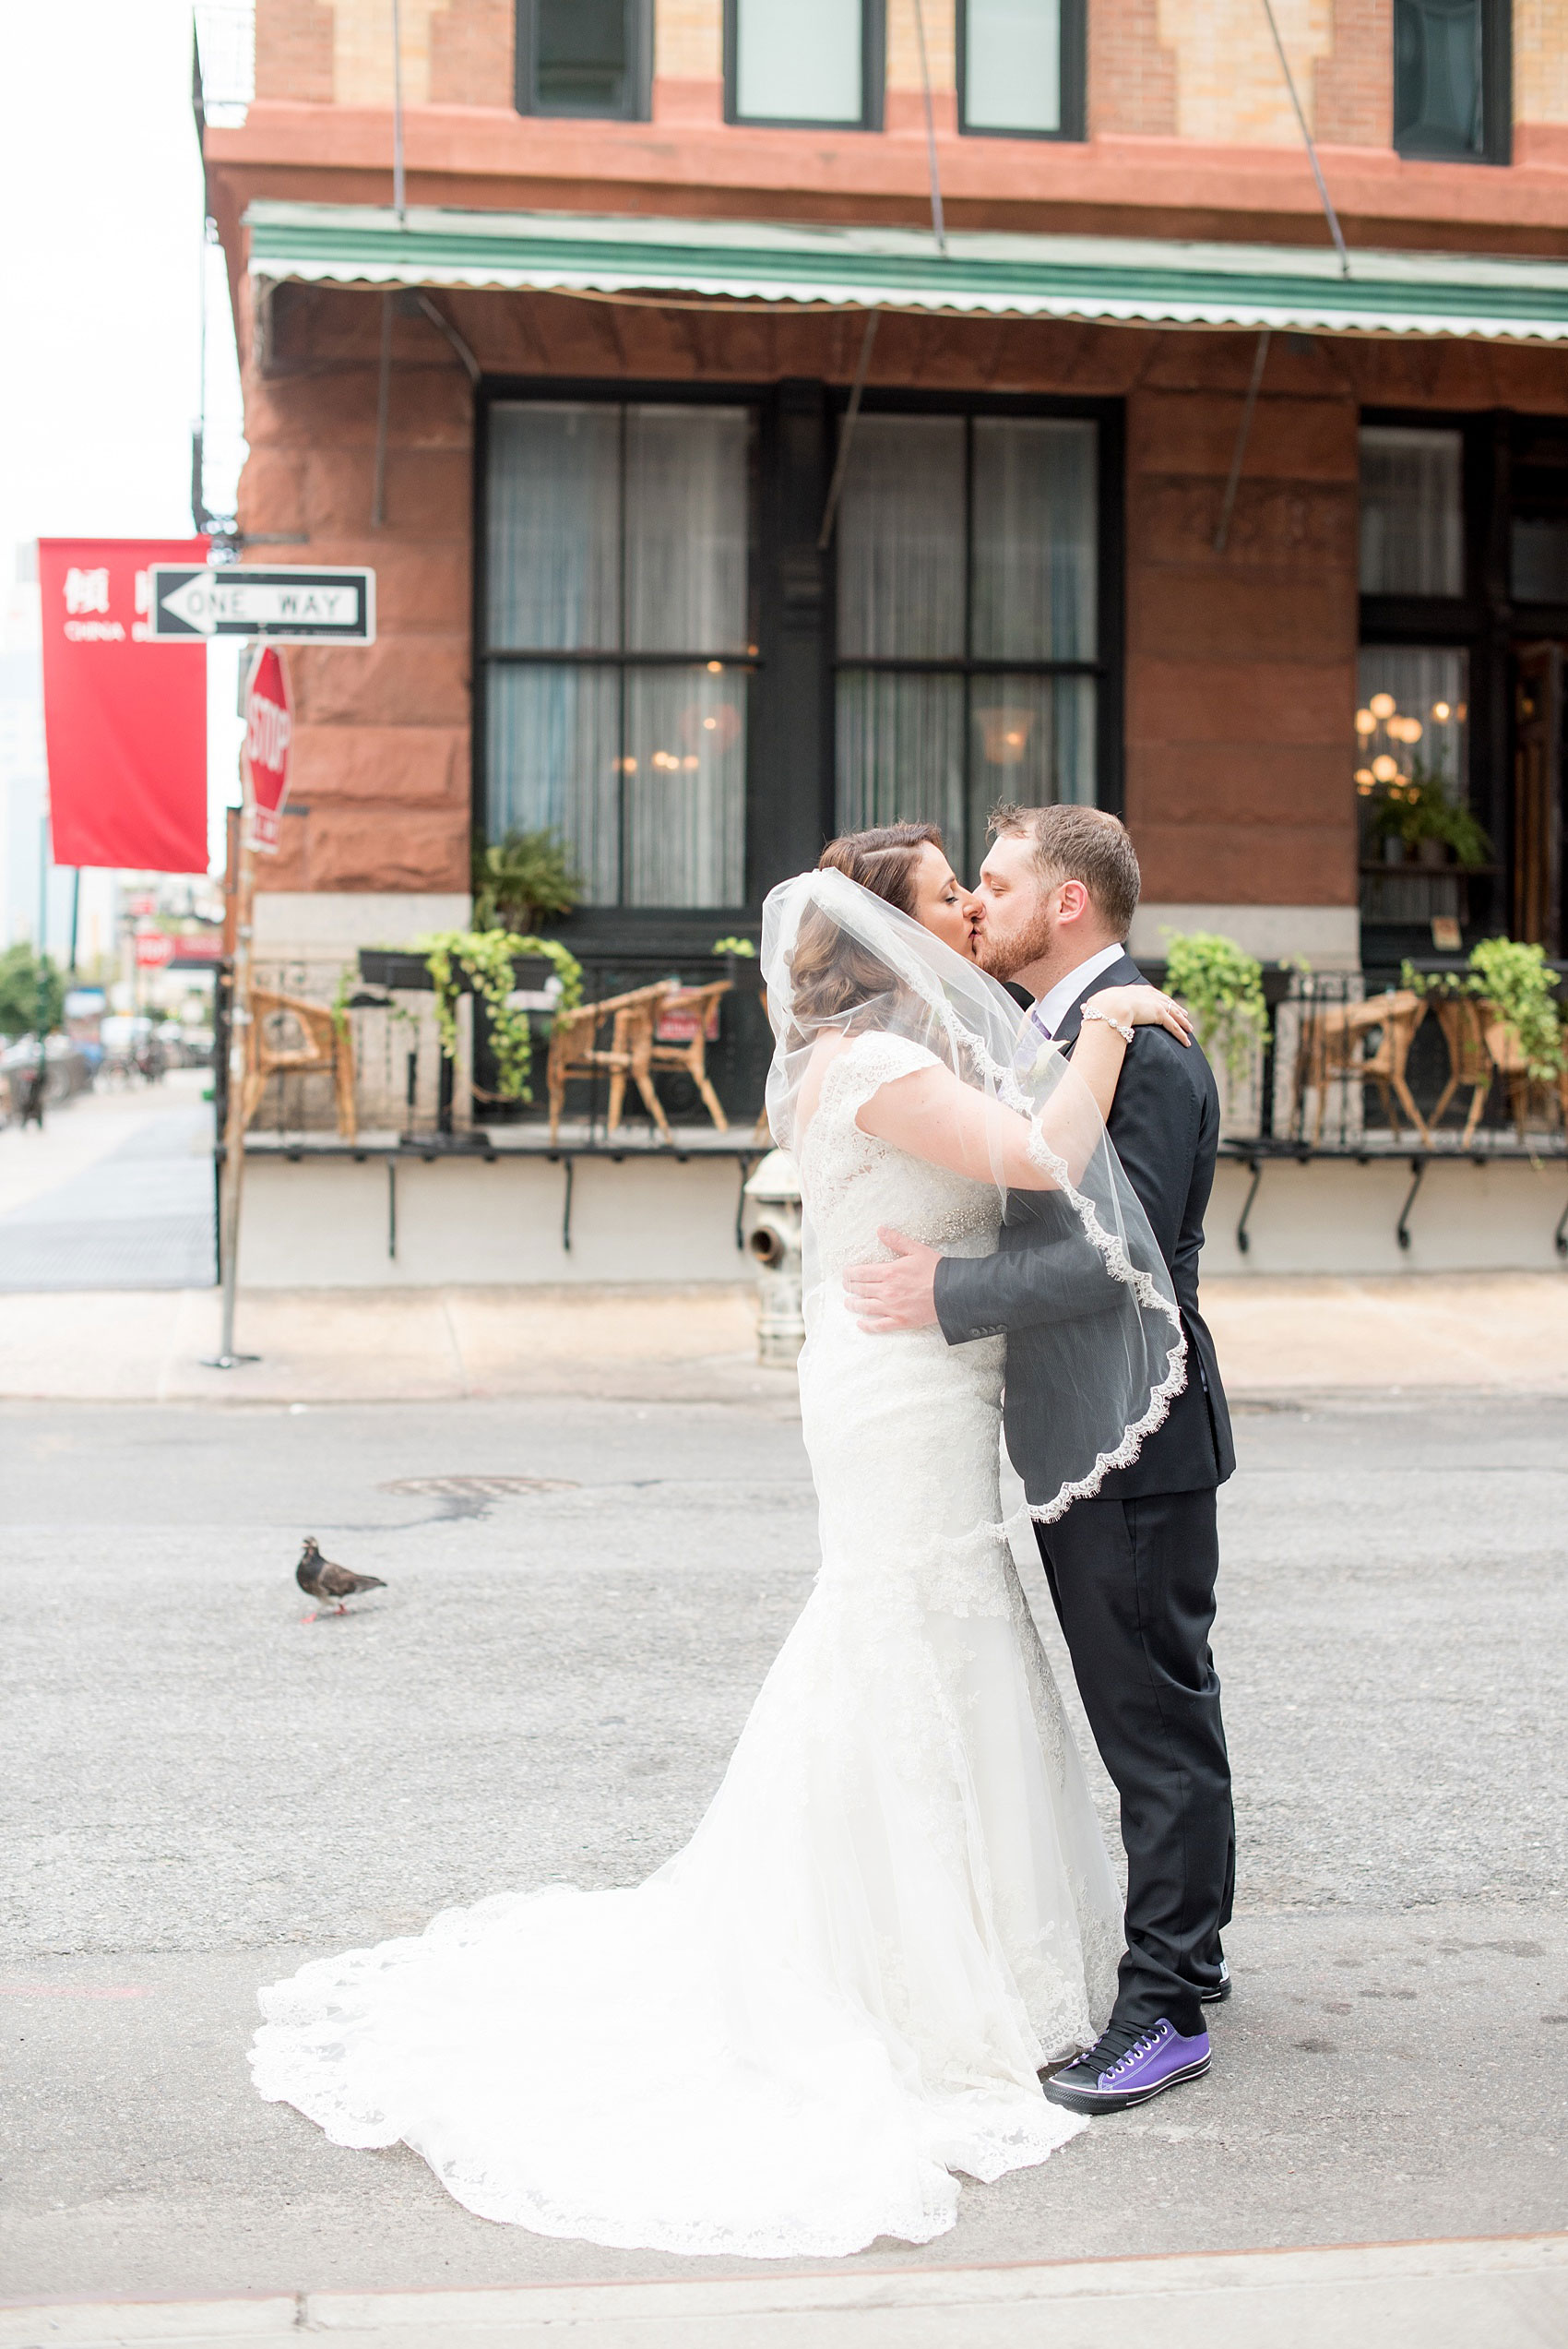 Mikkel Paige Photography photos of a NYC wedding at Tribeca Rooftop. An urban street image of the bride and groom kissing.